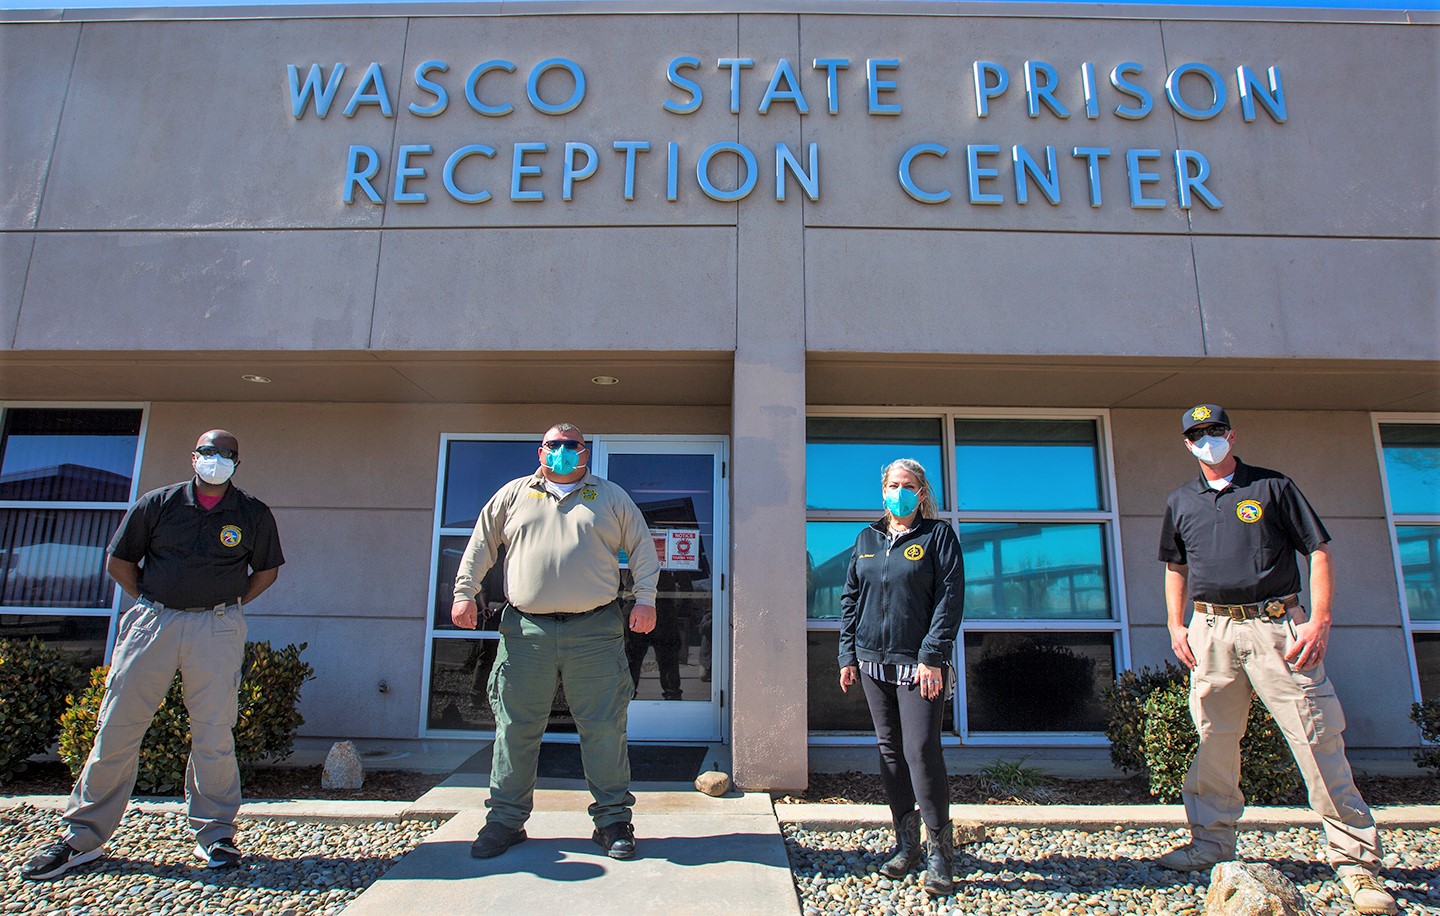 Wasco State Prison Reception Center with four Peer Support members standing in front.